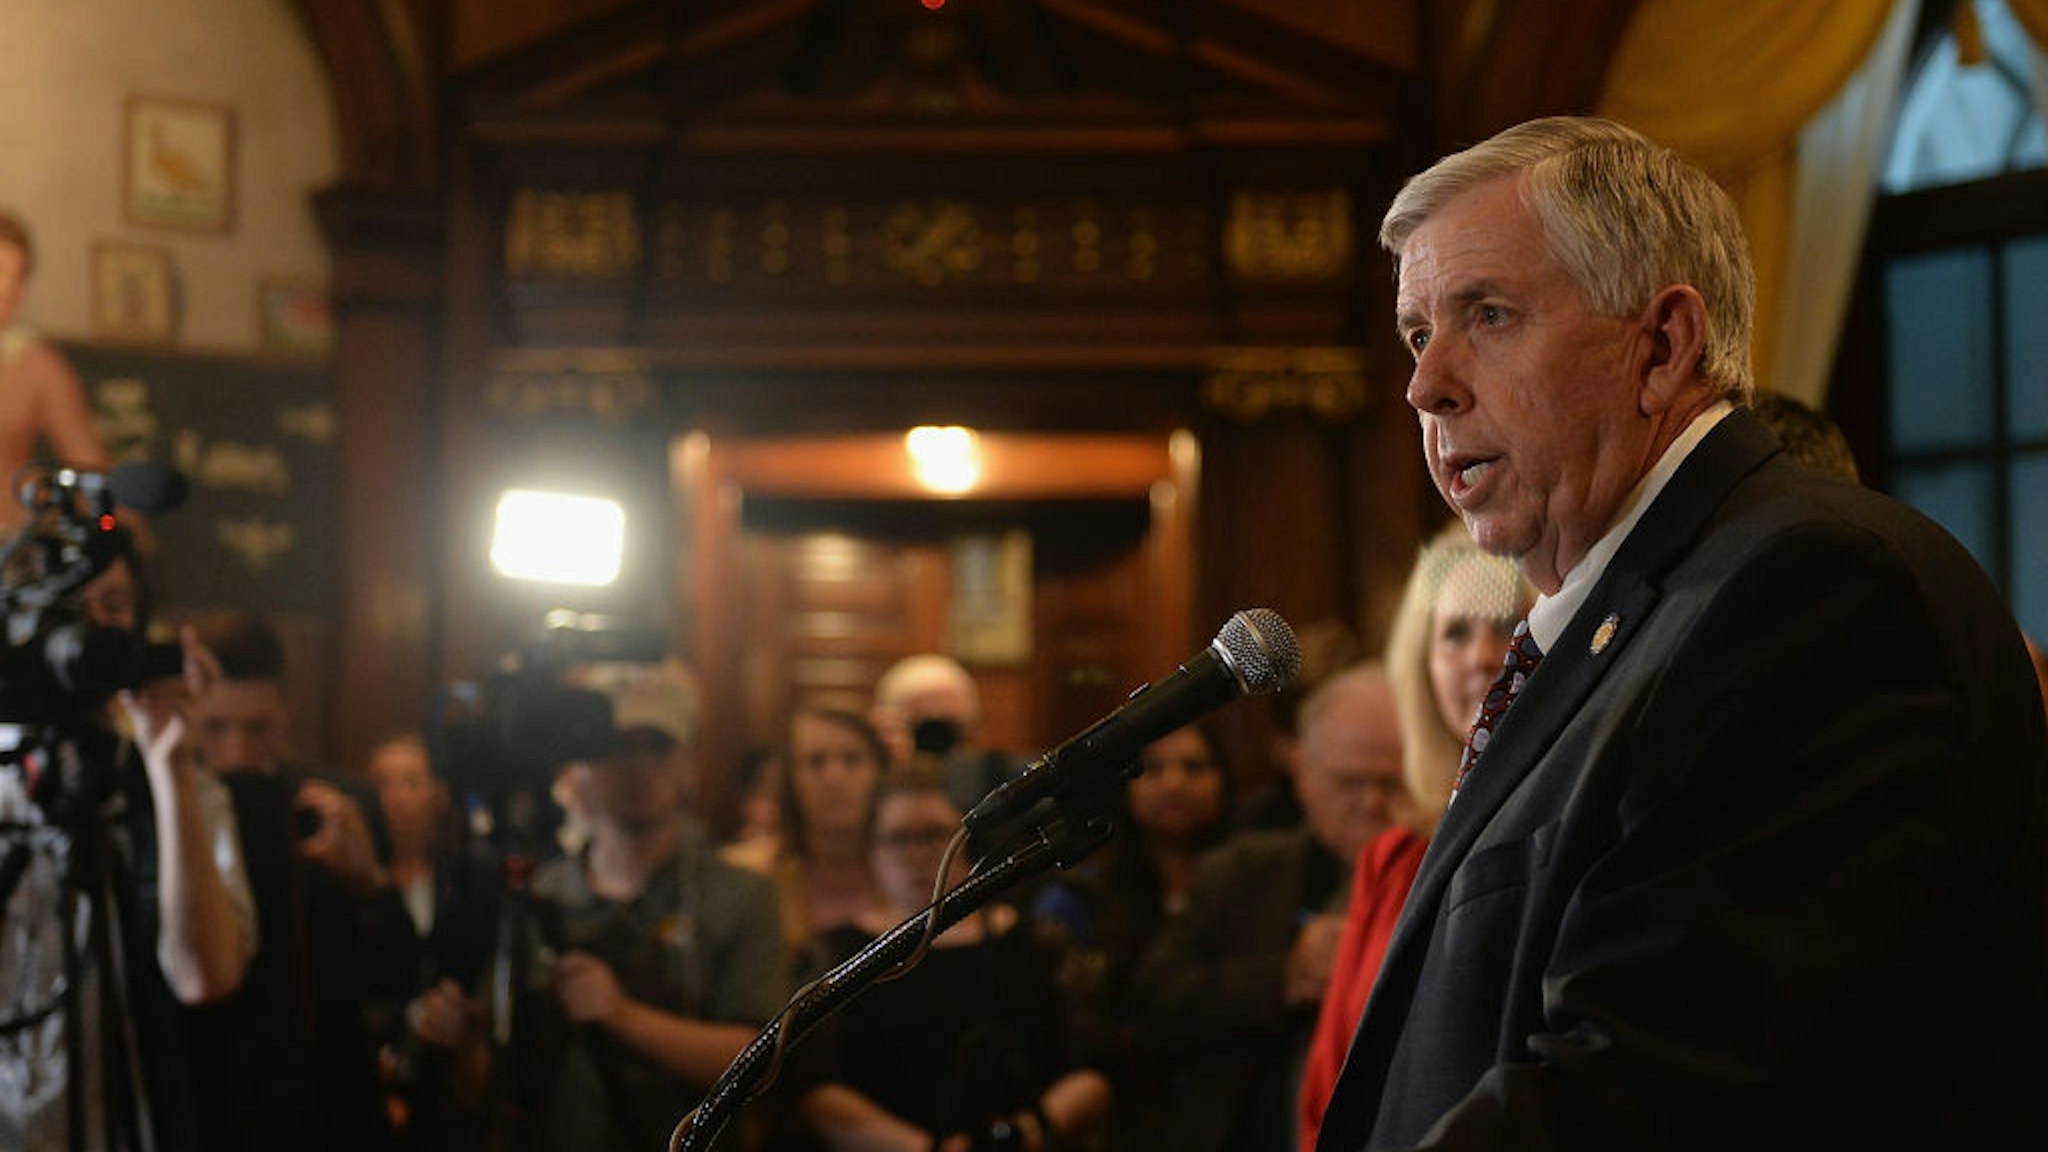 Missouri Governor Mike Parson addresses the media on the last day of legislative session at the Missouri State Capitol Building on May 17, 2019 in Jefferson City, Missouri. Tension and protest arose after the Missouri House of Representatives passed a bill to ban abortions after 8 weeks of pregnancy. (Photo by Michael B. Thomas/Getty Images)